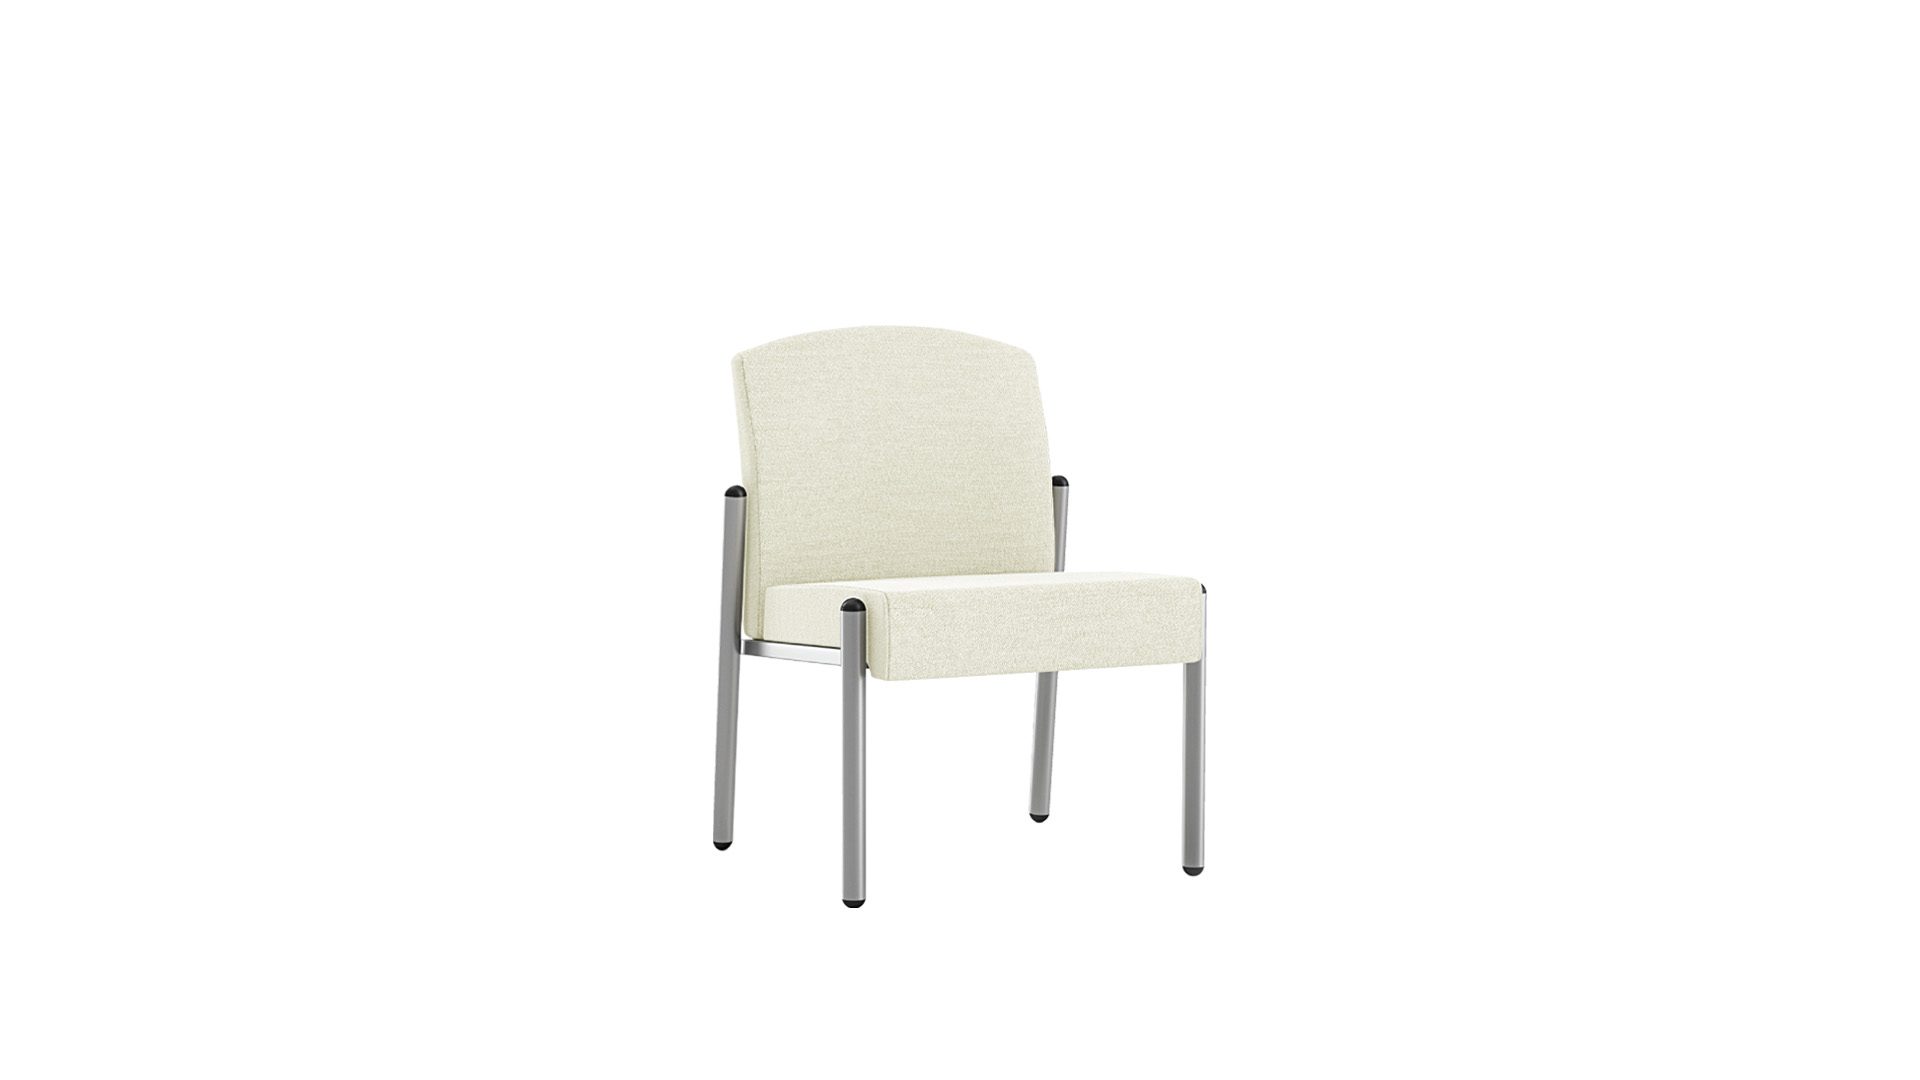 NTG100-AL Integrity Armless Guest Chair with 21" Seat